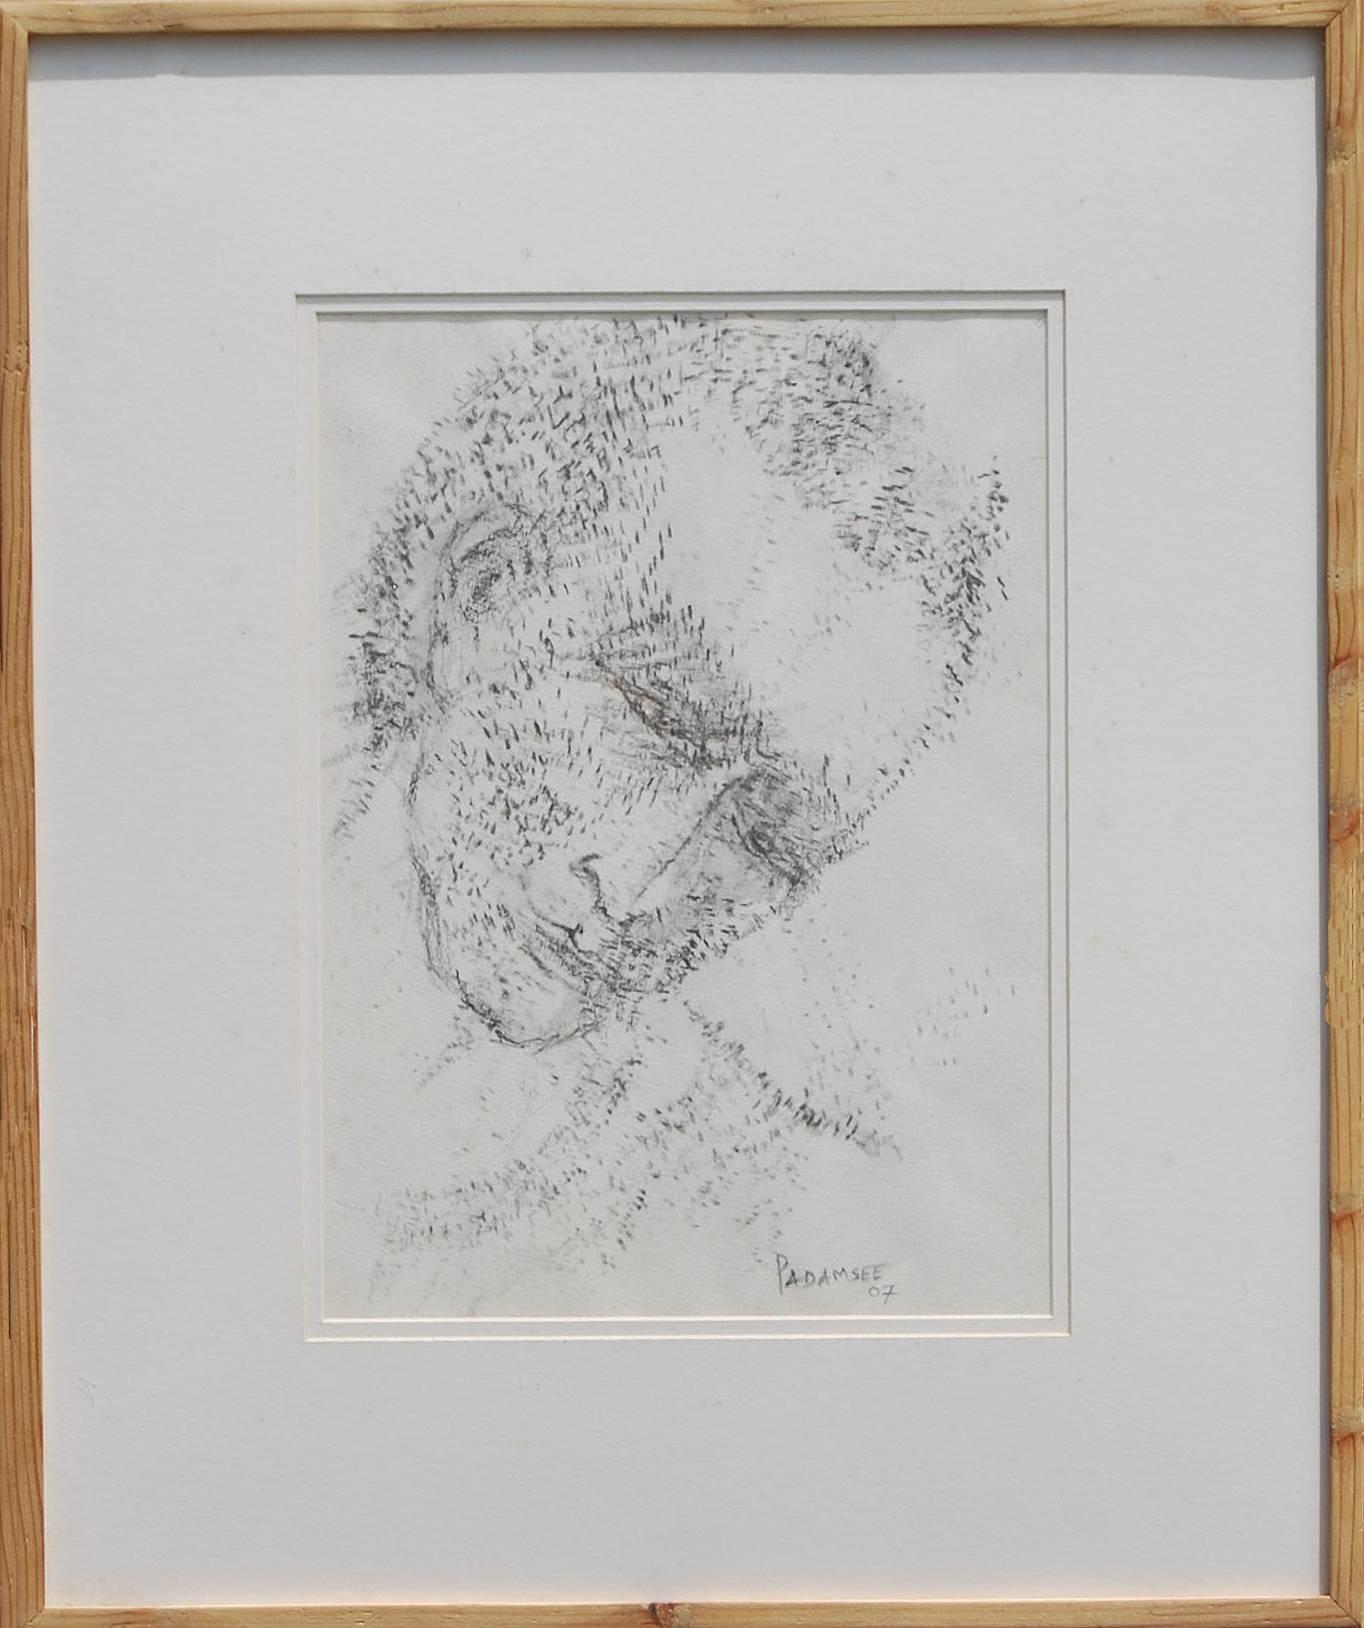 Potrait, A Man, Chinese Ink Paper, Black-White by Indian Master Artist"In Stock"